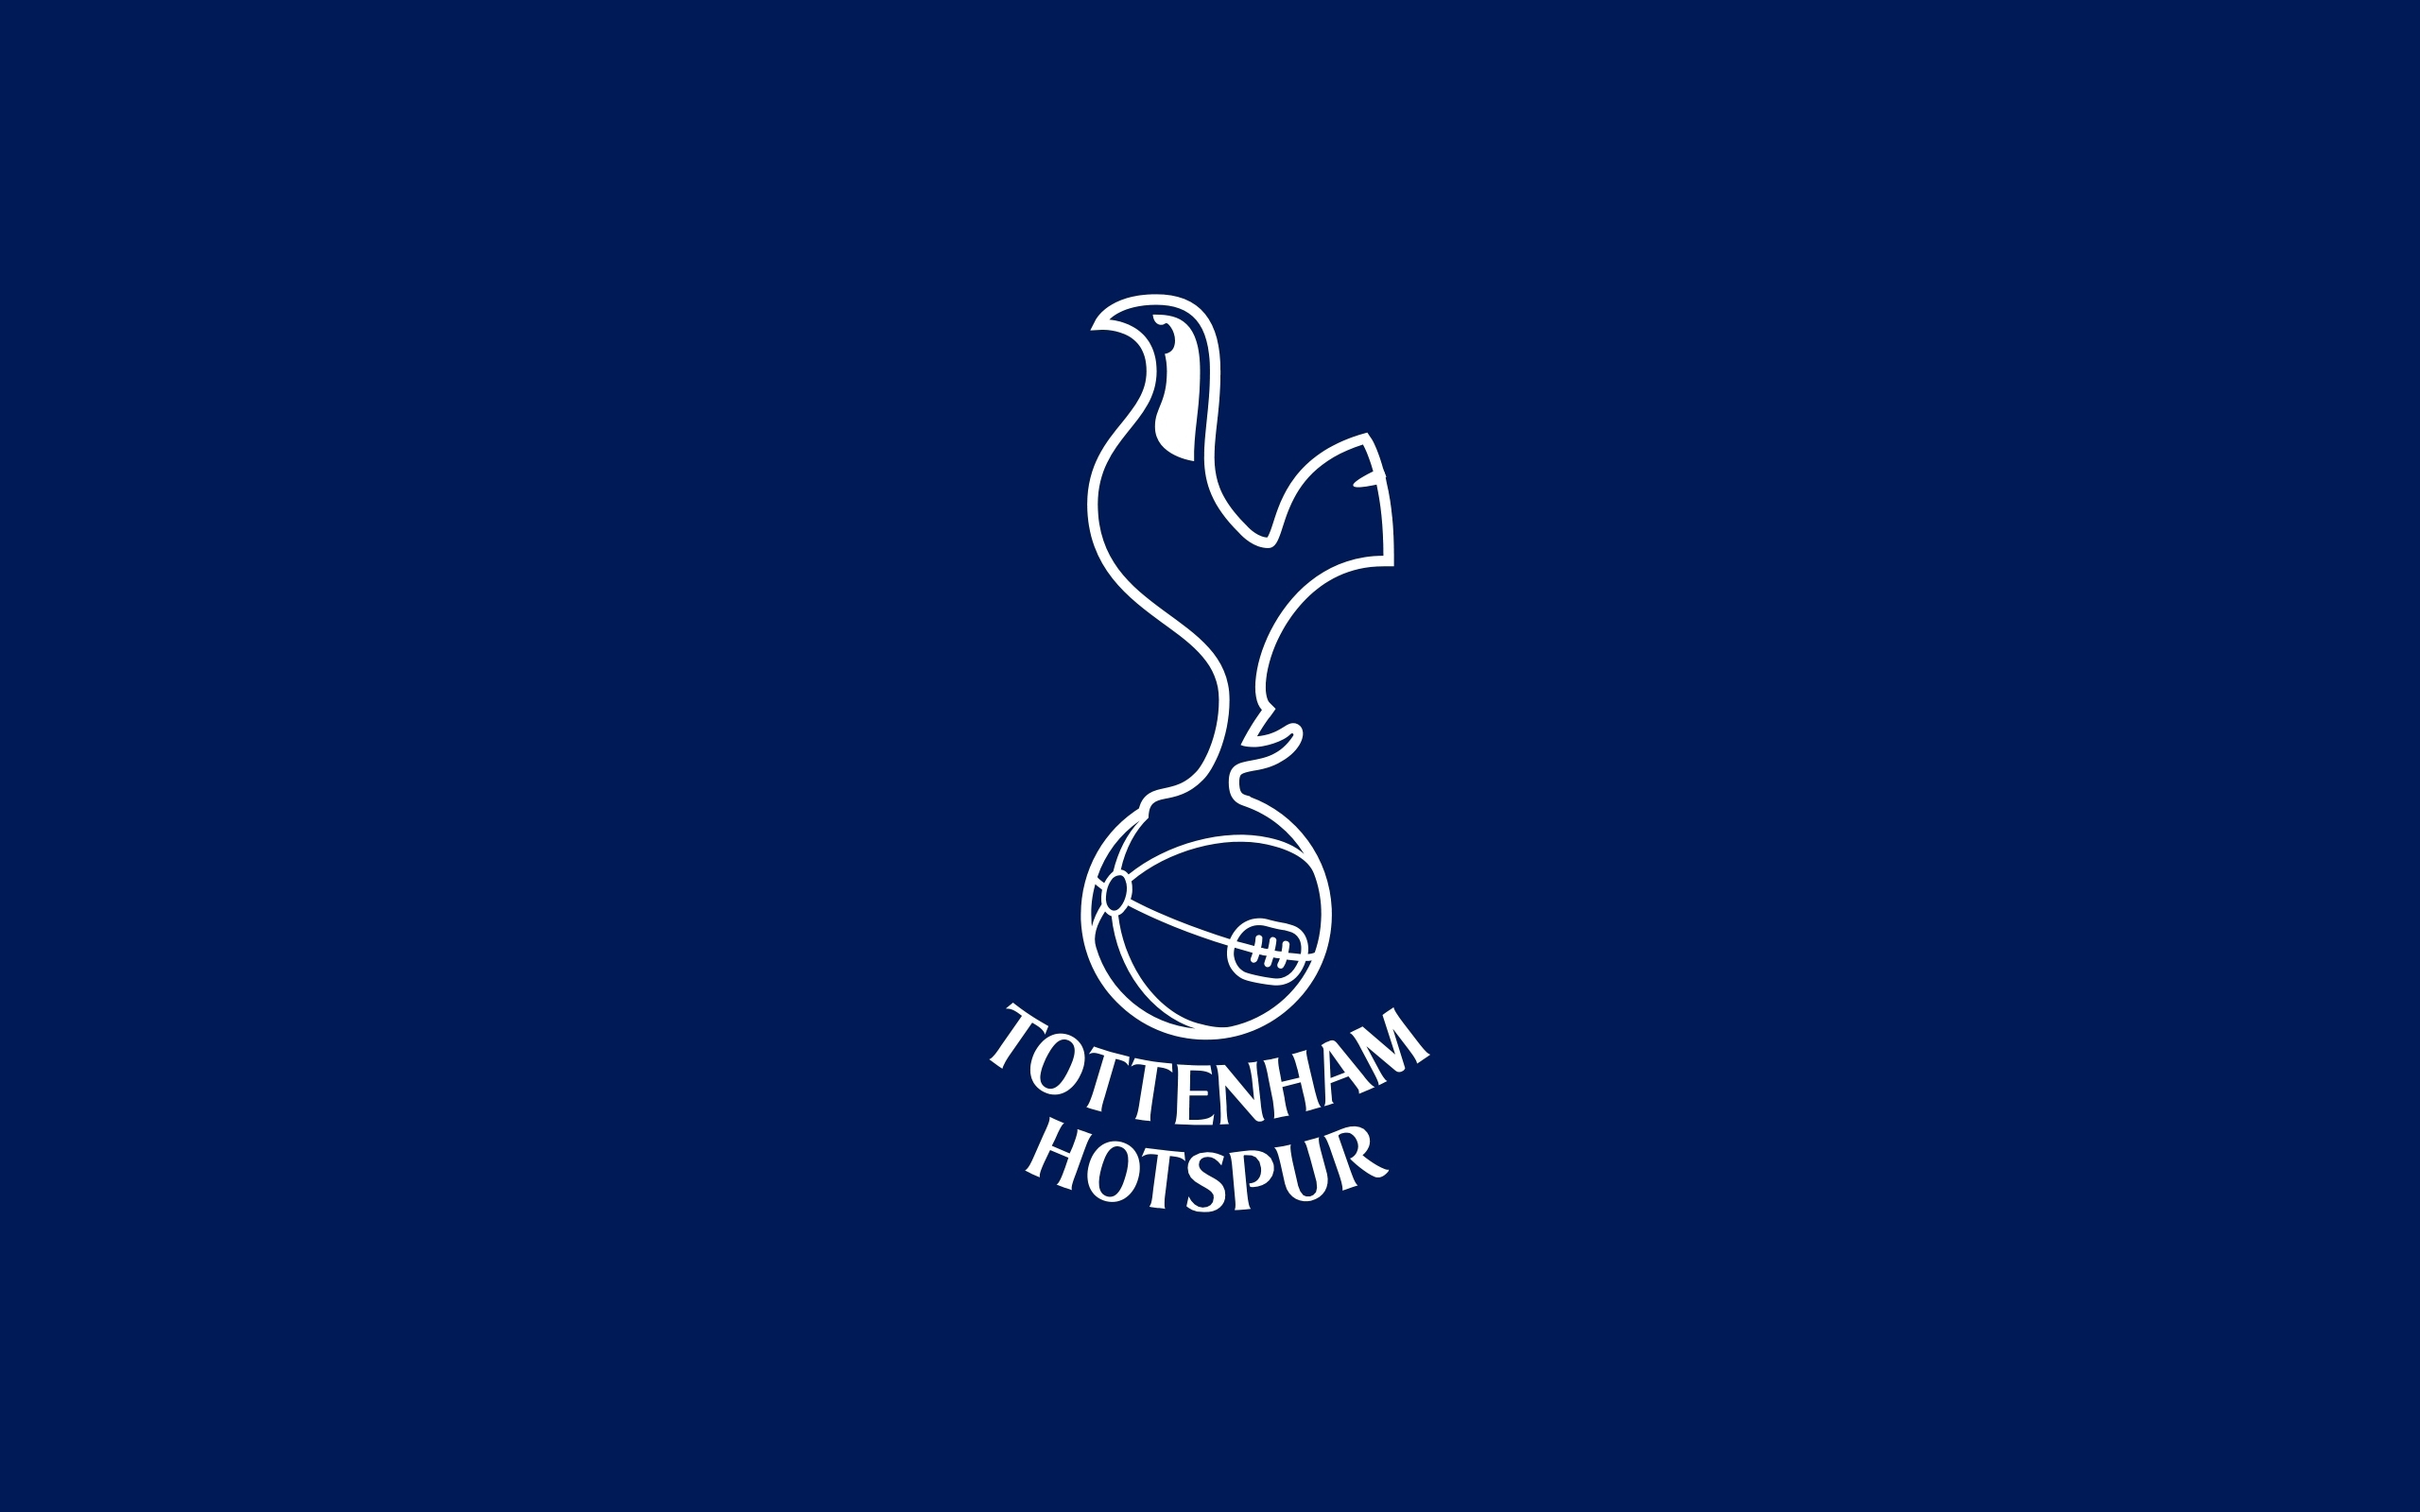 VALID NEWS; Tottenham close to agreeing midfielder transfer with Ligue 1 side.